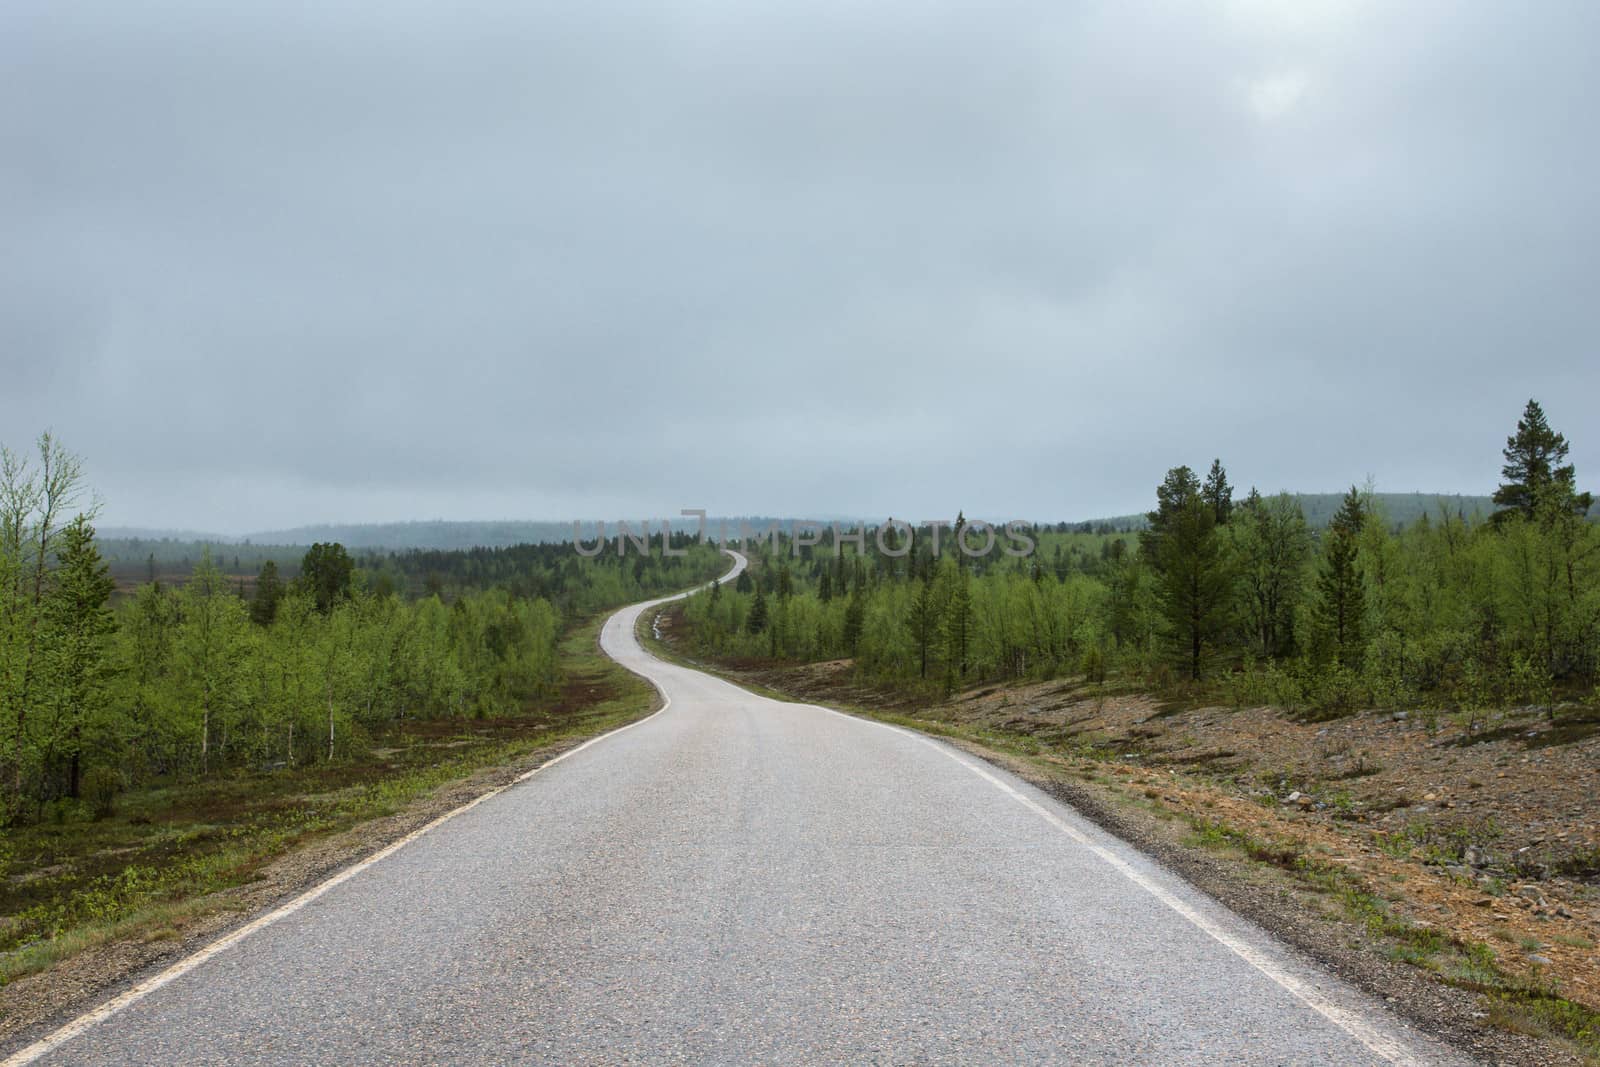 Considered one of the main roads in northern Lapland, this empty and paved motorway winds through marshland and forests.